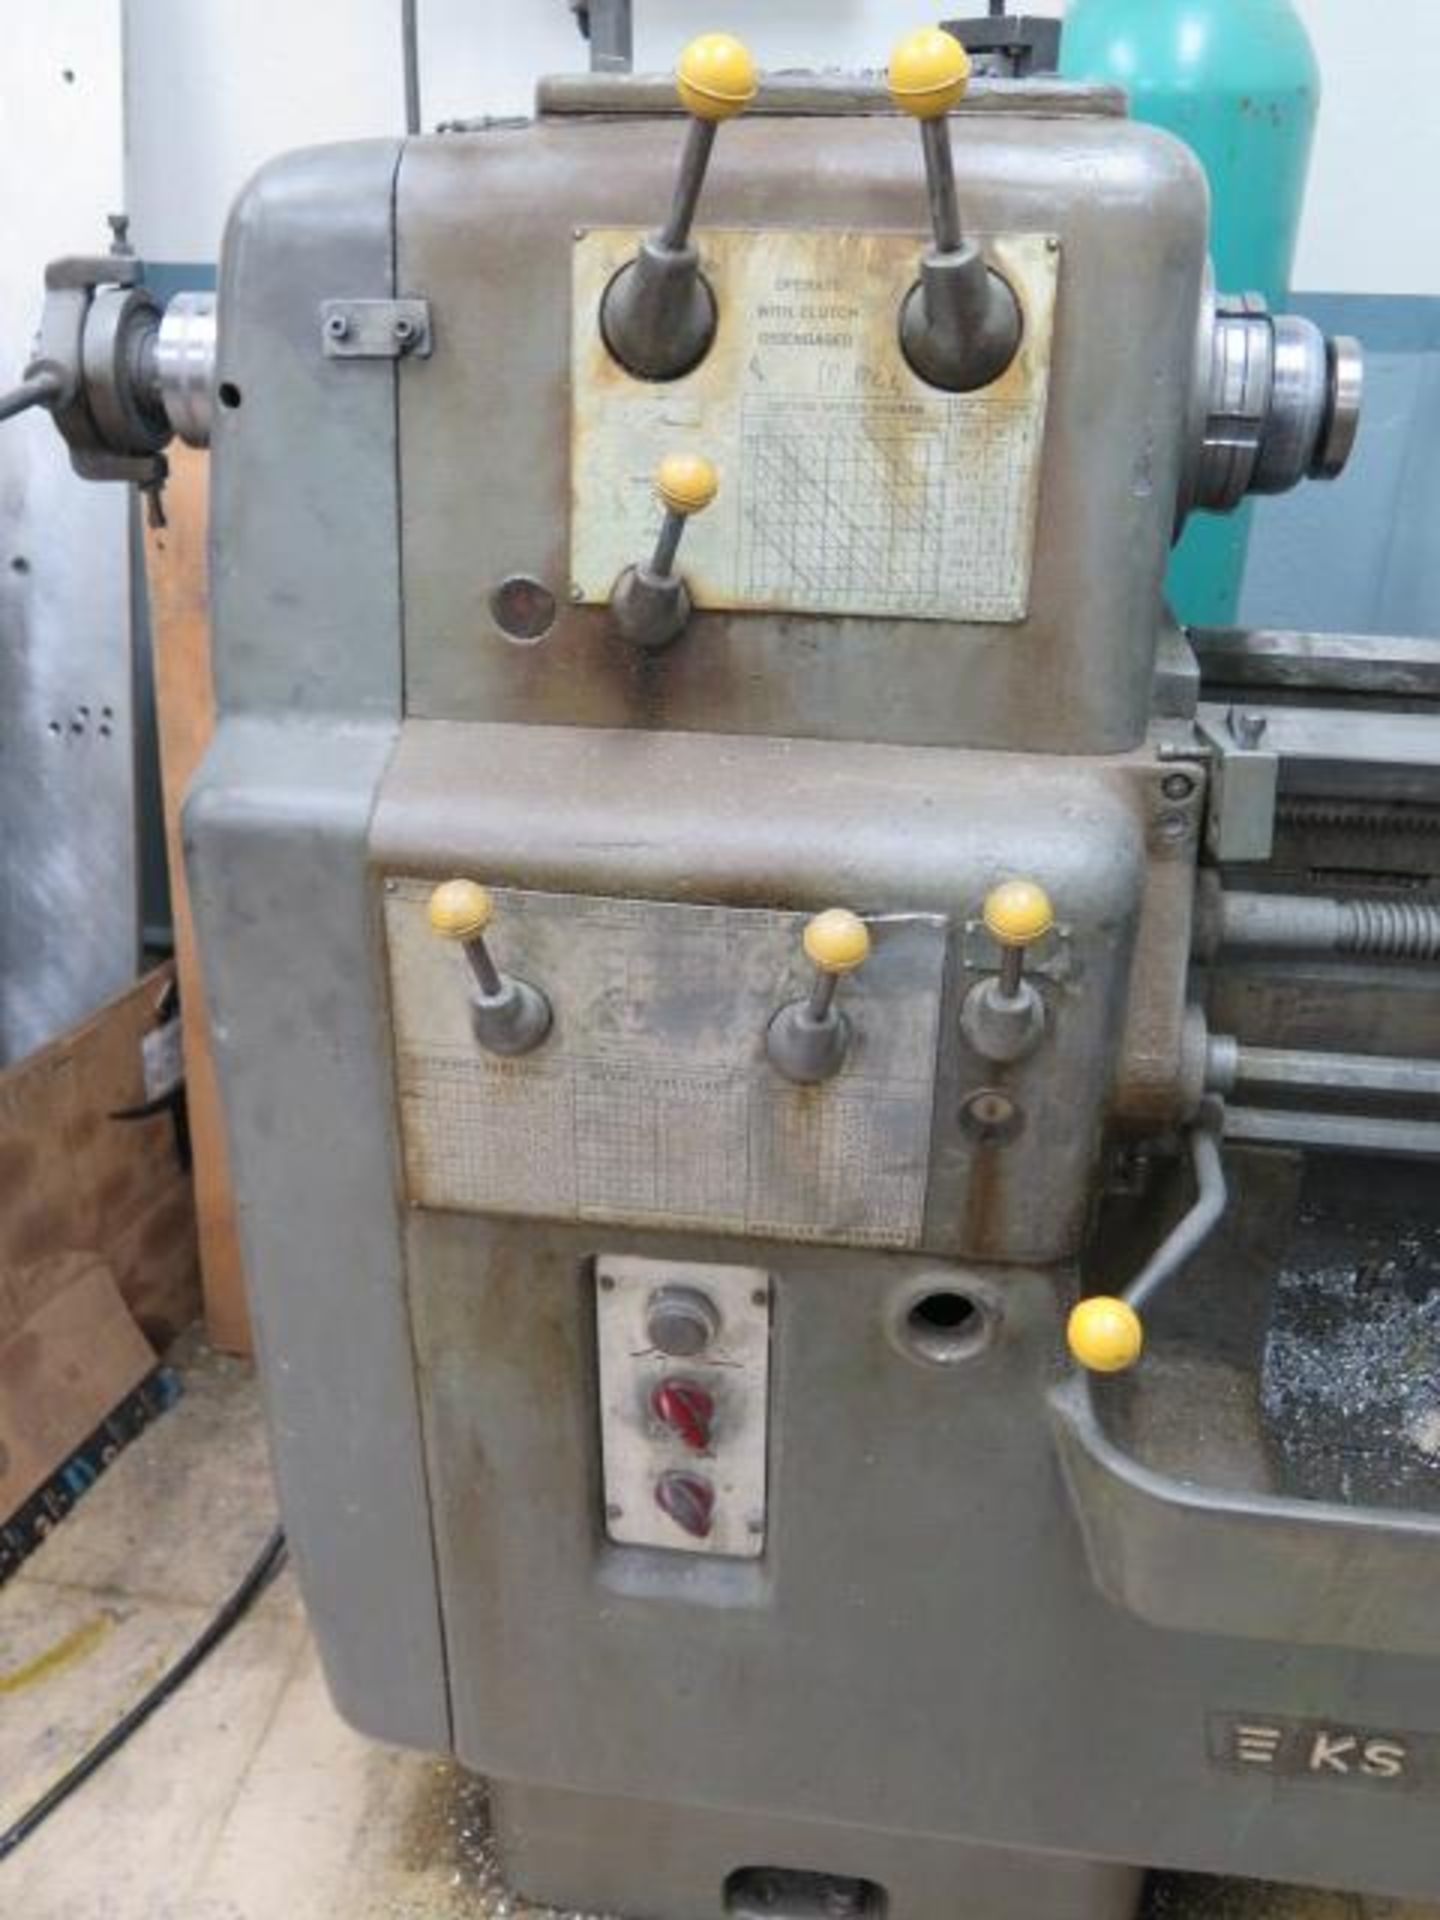 Saimp KS-155 Geared Head Lathe s/n 2636 w/ 45-1500 RPM, Inch/mm Threading, Tailstock, SOLD AS IS - Image 3 of 12